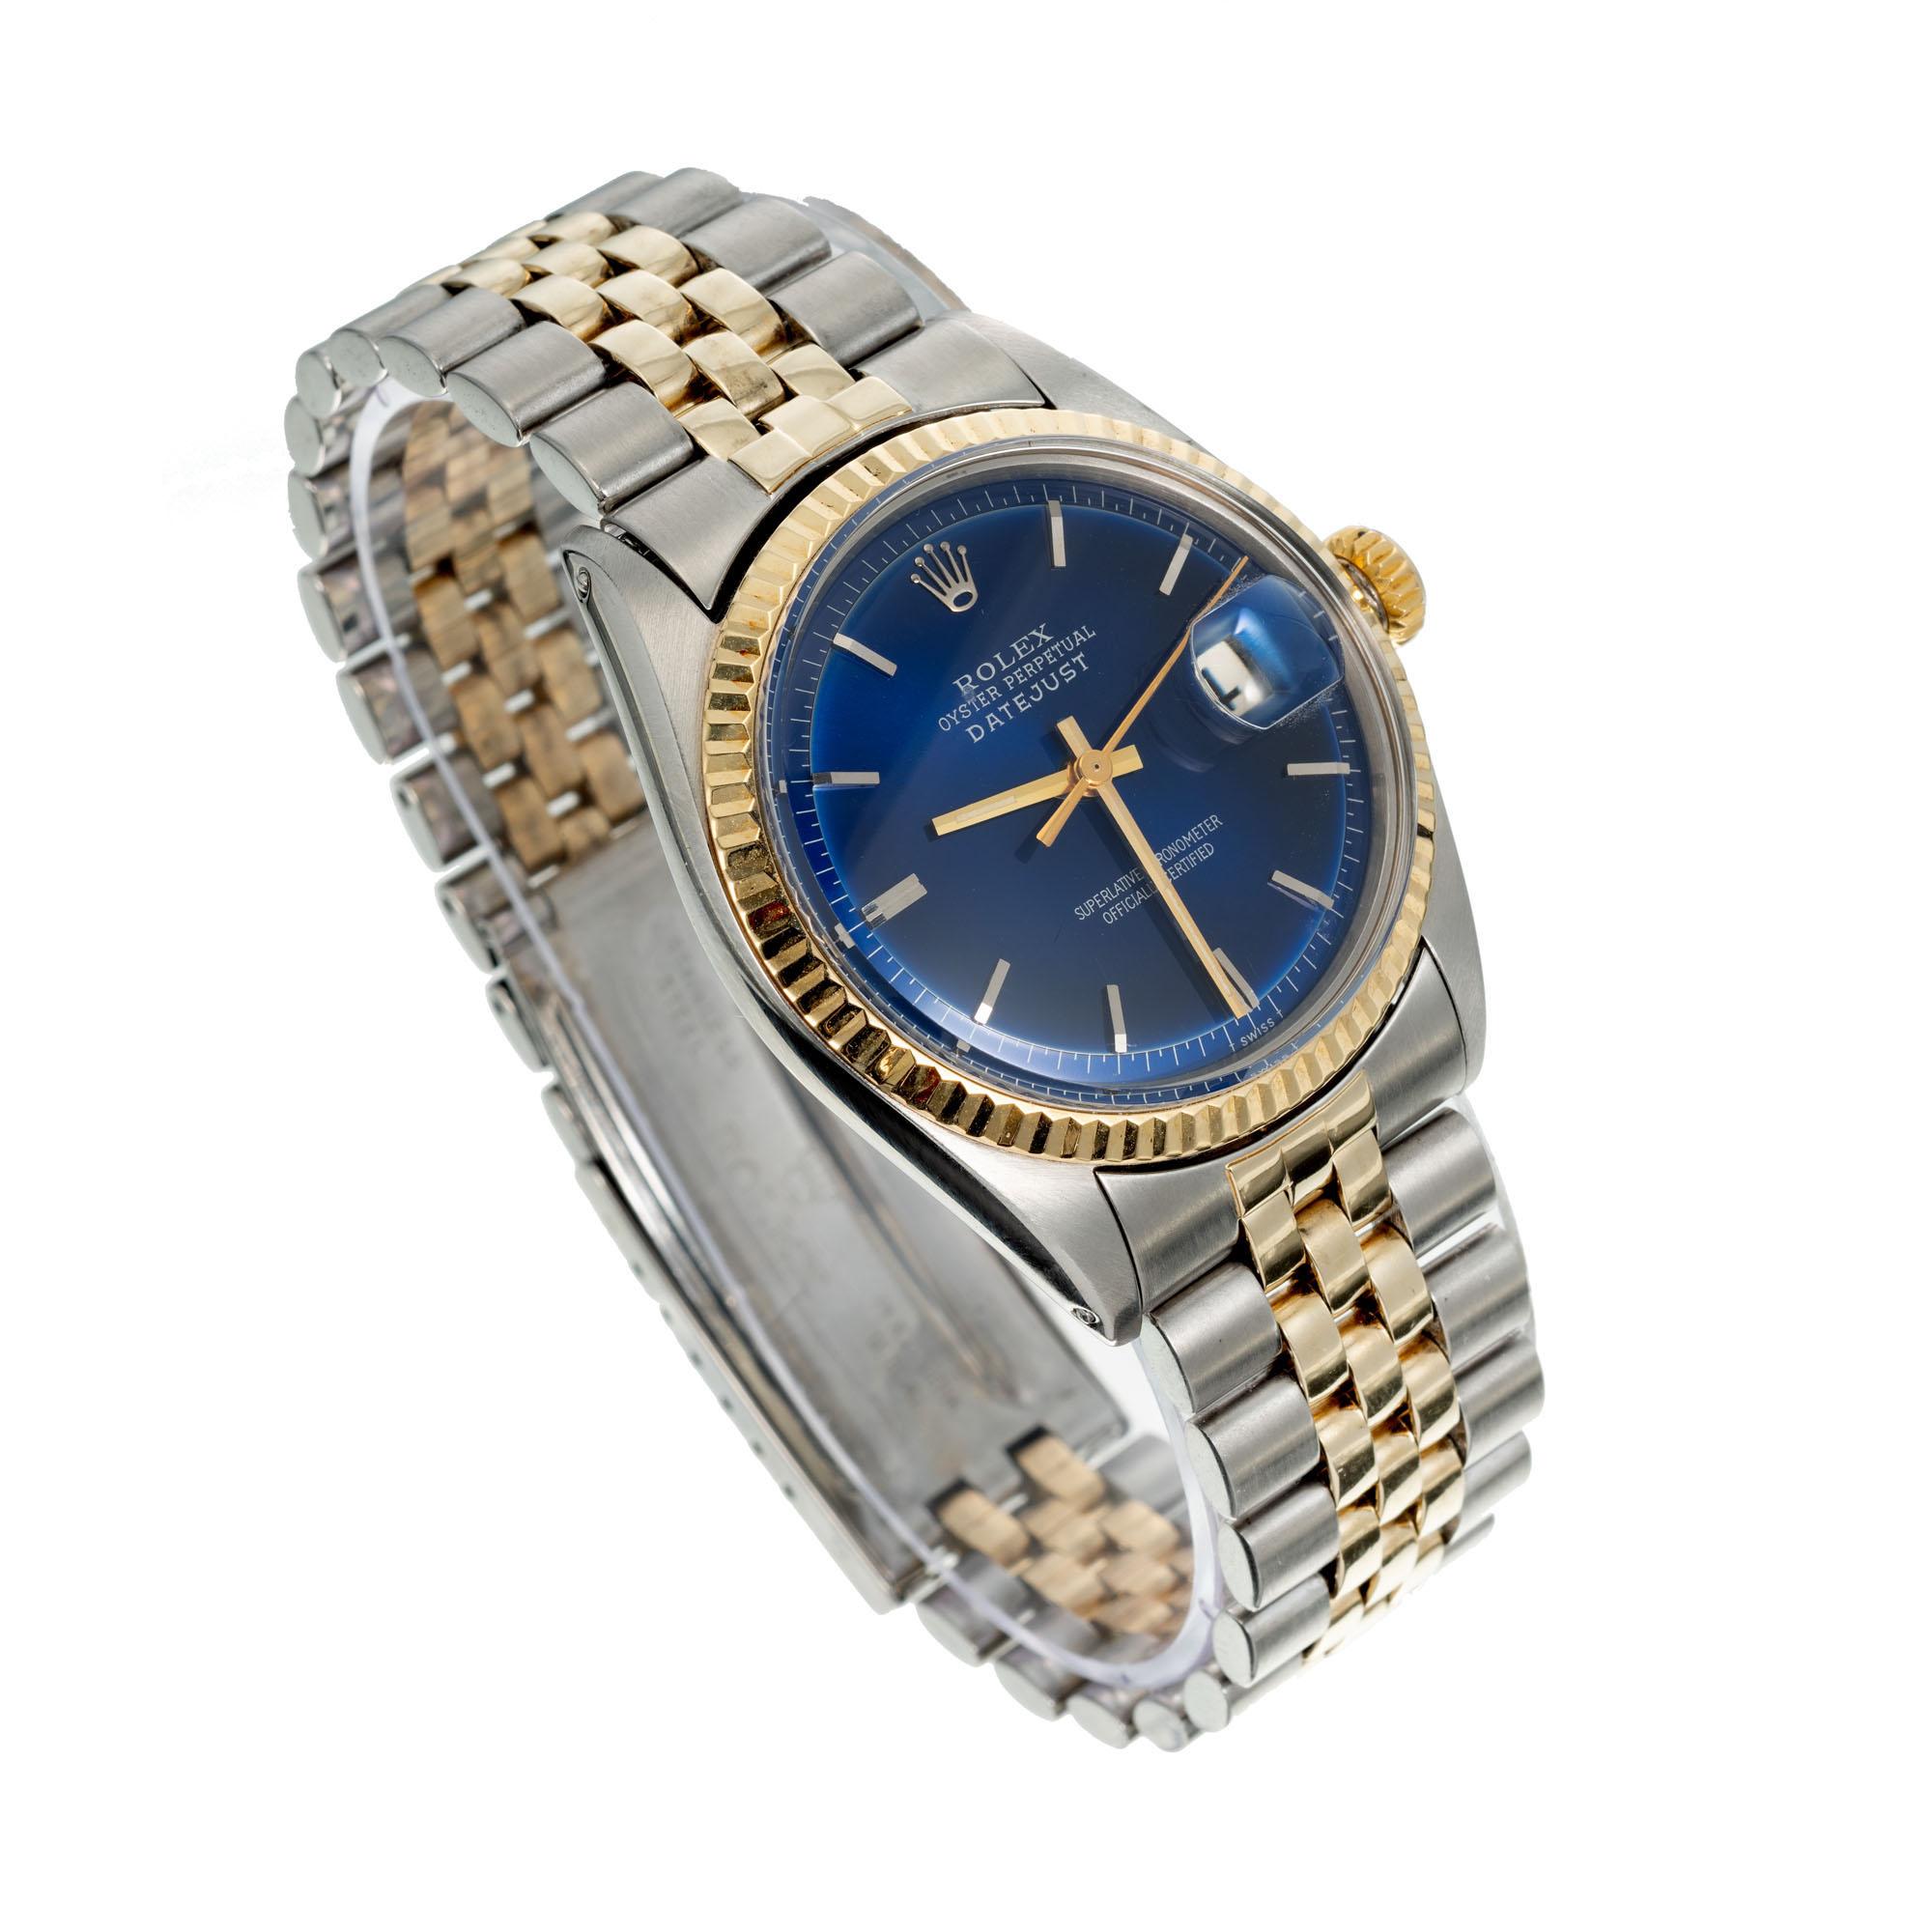 Vintage Rolex datejust model 1601 circa 1966. 14k stainless-steel and yellow gold case and band. Refinished royal blue dial. Upgraded sapphire. recently serviced. 

Length: 43.30mm
Width: 35mm
Band width at case: 20mm
Case thickness: 12.23m
Band: